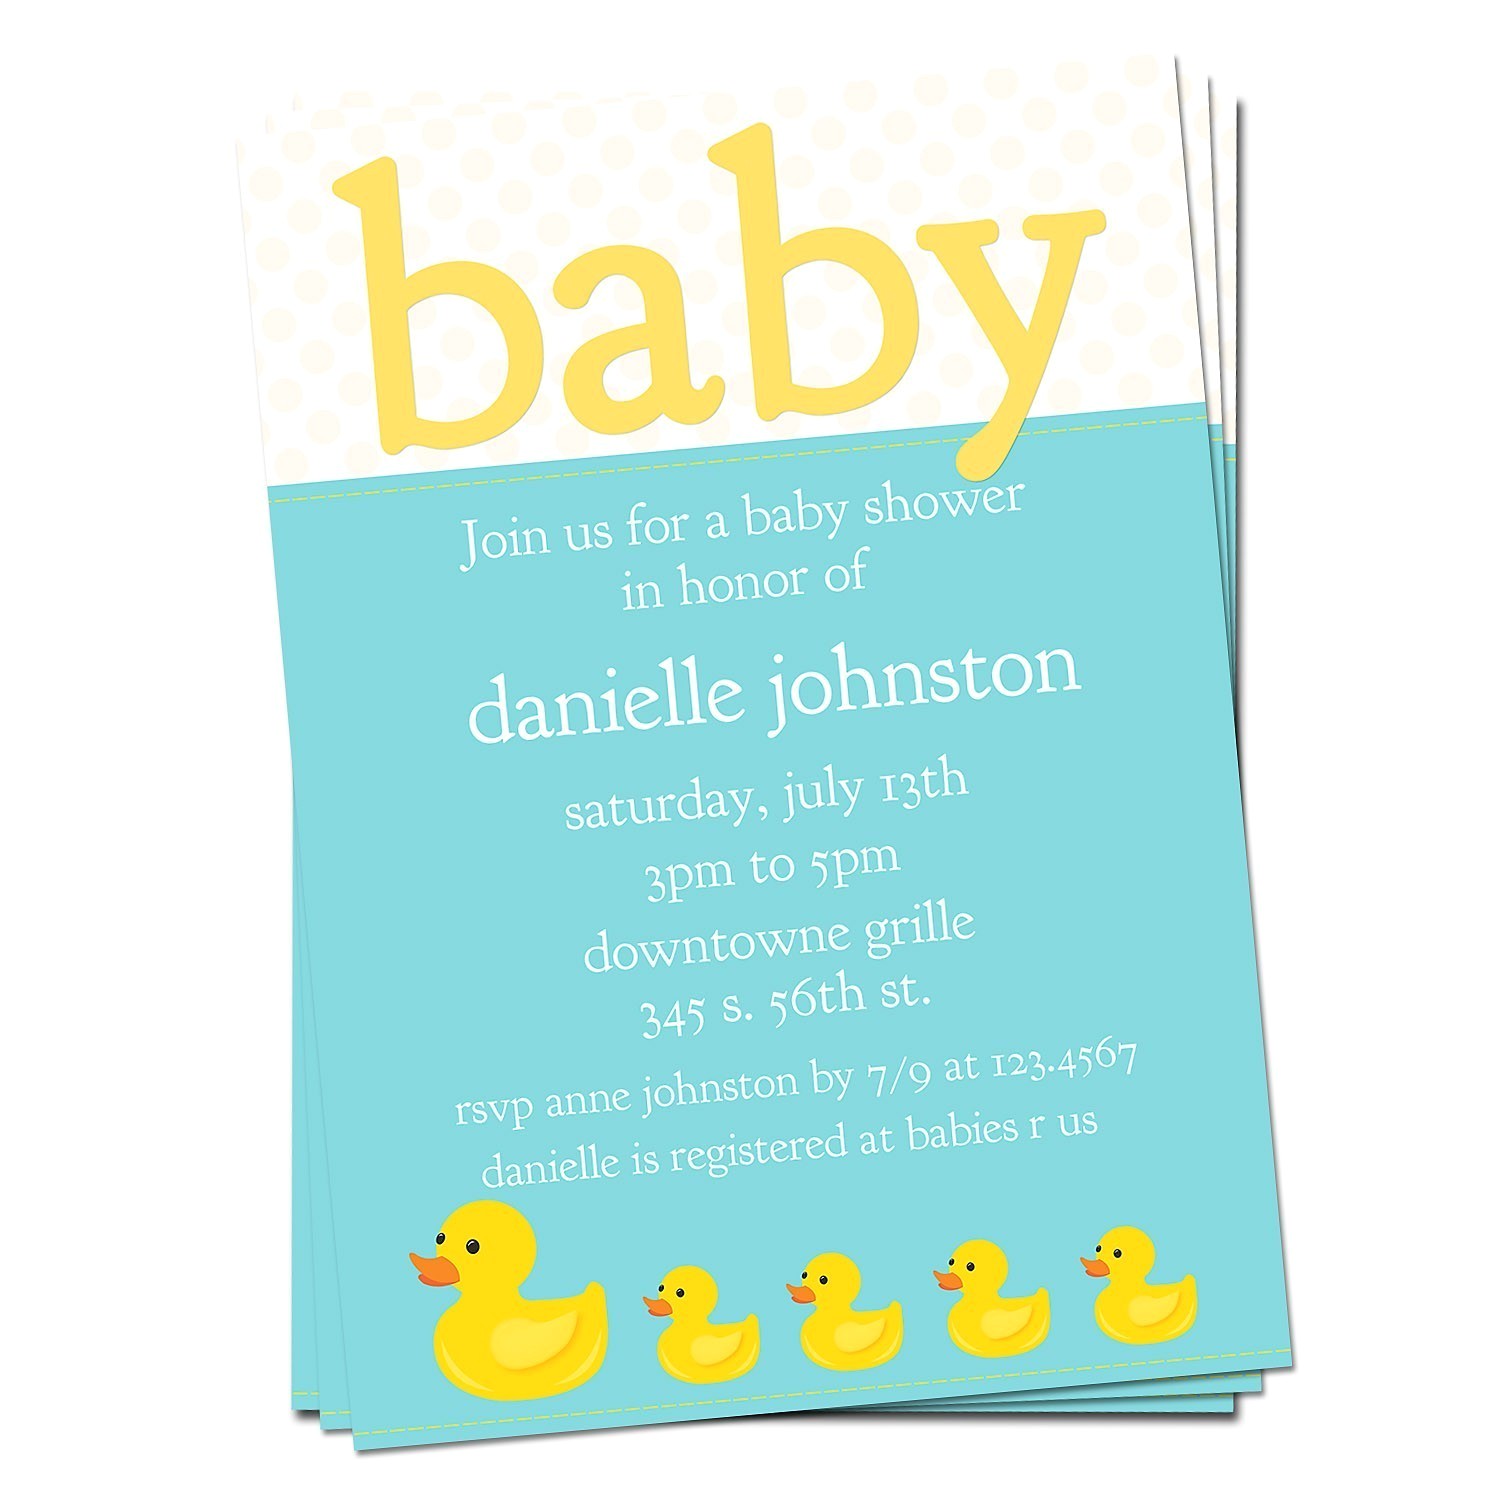 Rubber Ducky Baby Shower Invitations Template Free Rubber Ducky Baby Shower Invitations